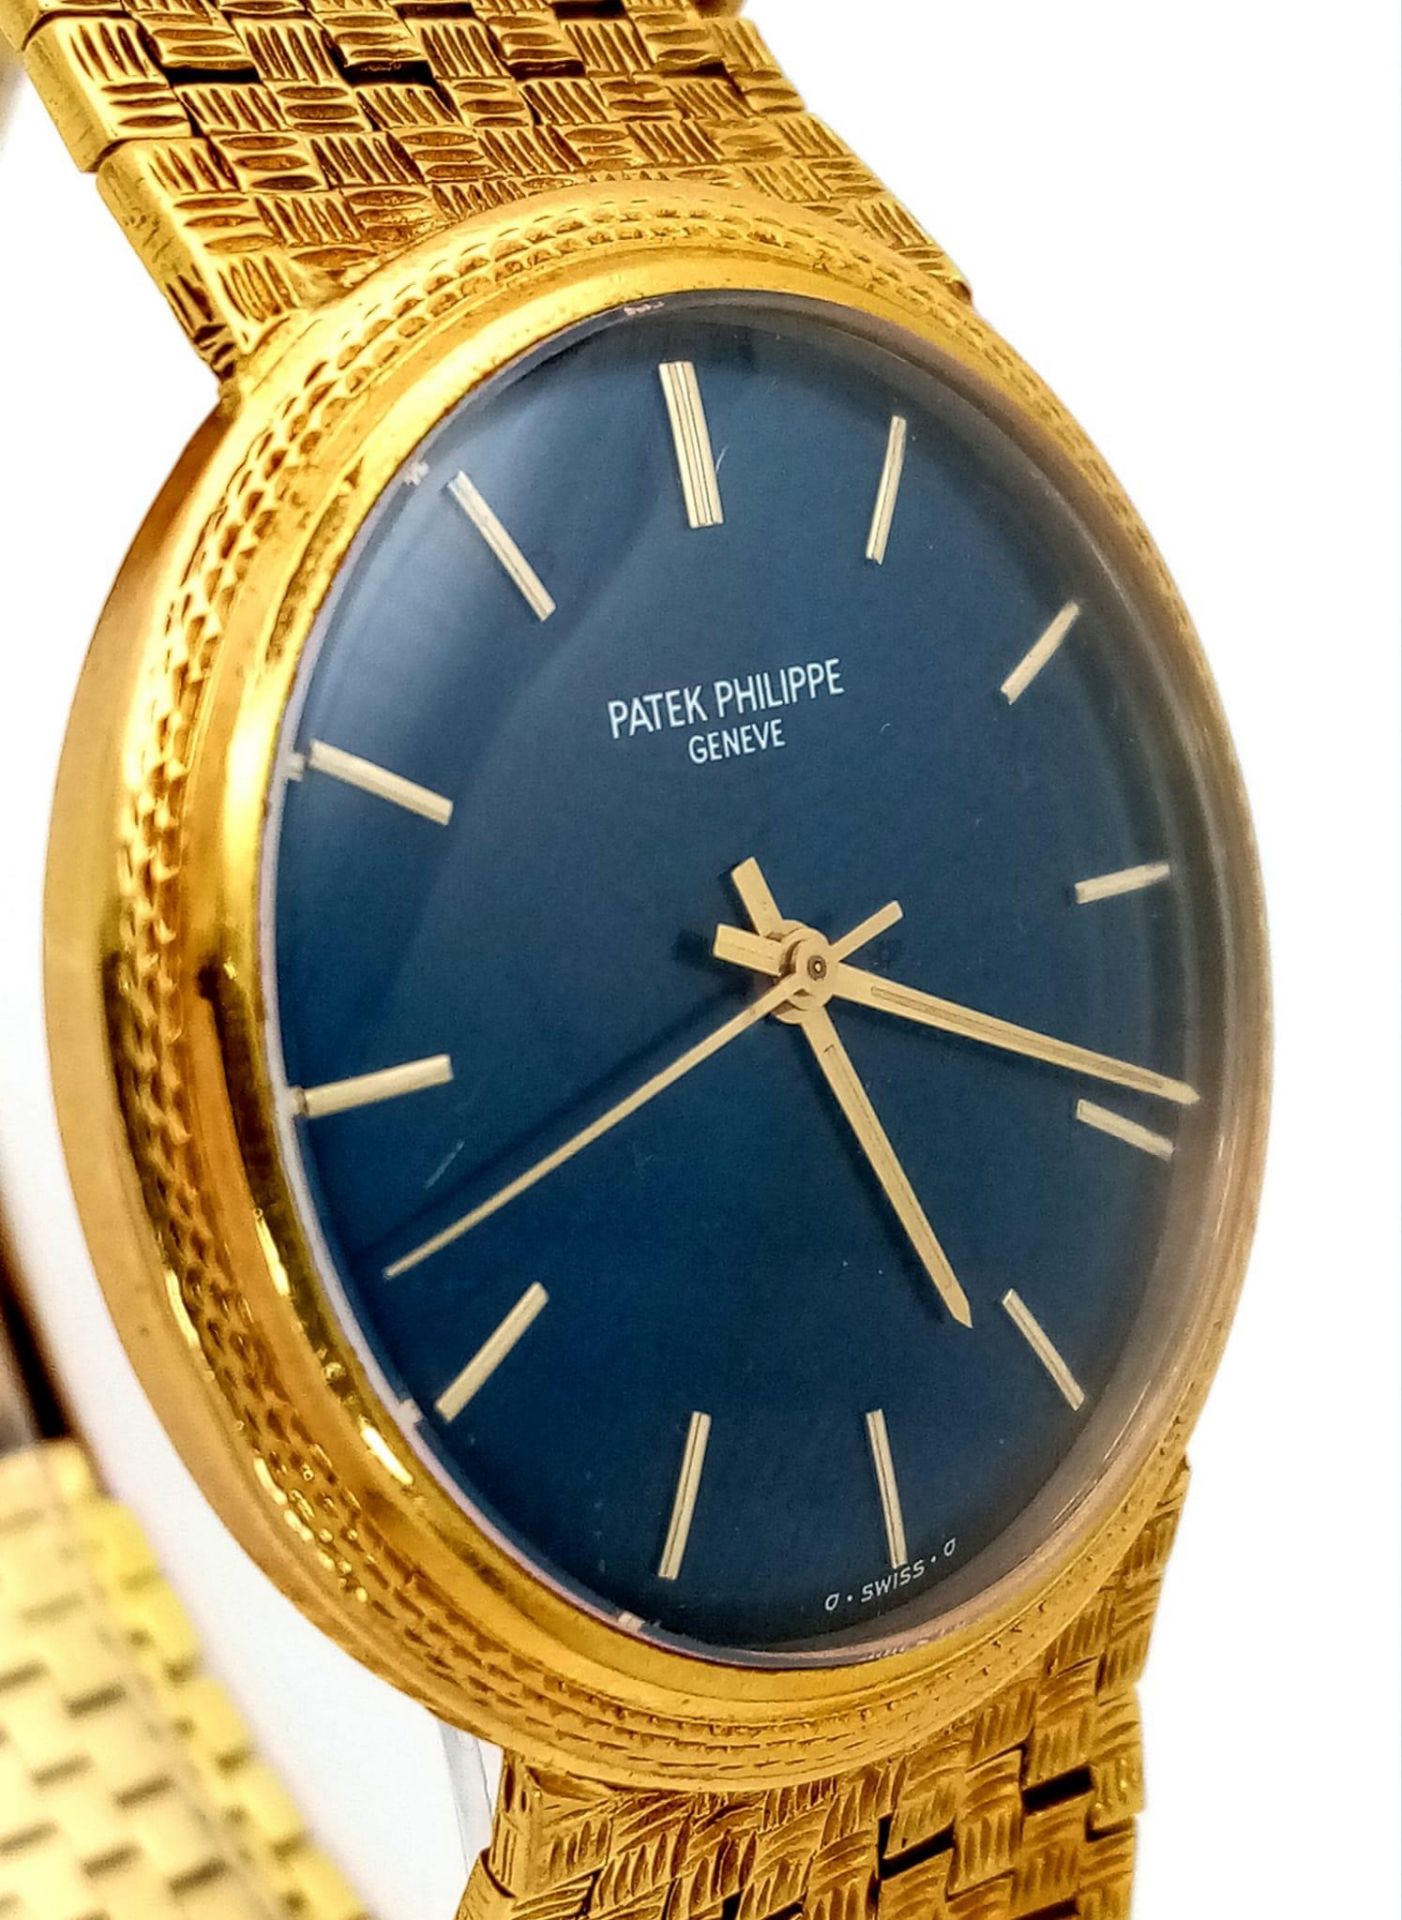 A SHOW STOPPING 18K GOLD PATEK PHILIPPE GENTS WATCH WITH BLOCK LINK SOLID 18K GOLD STRAP, AMAZING - Image 2 of 8